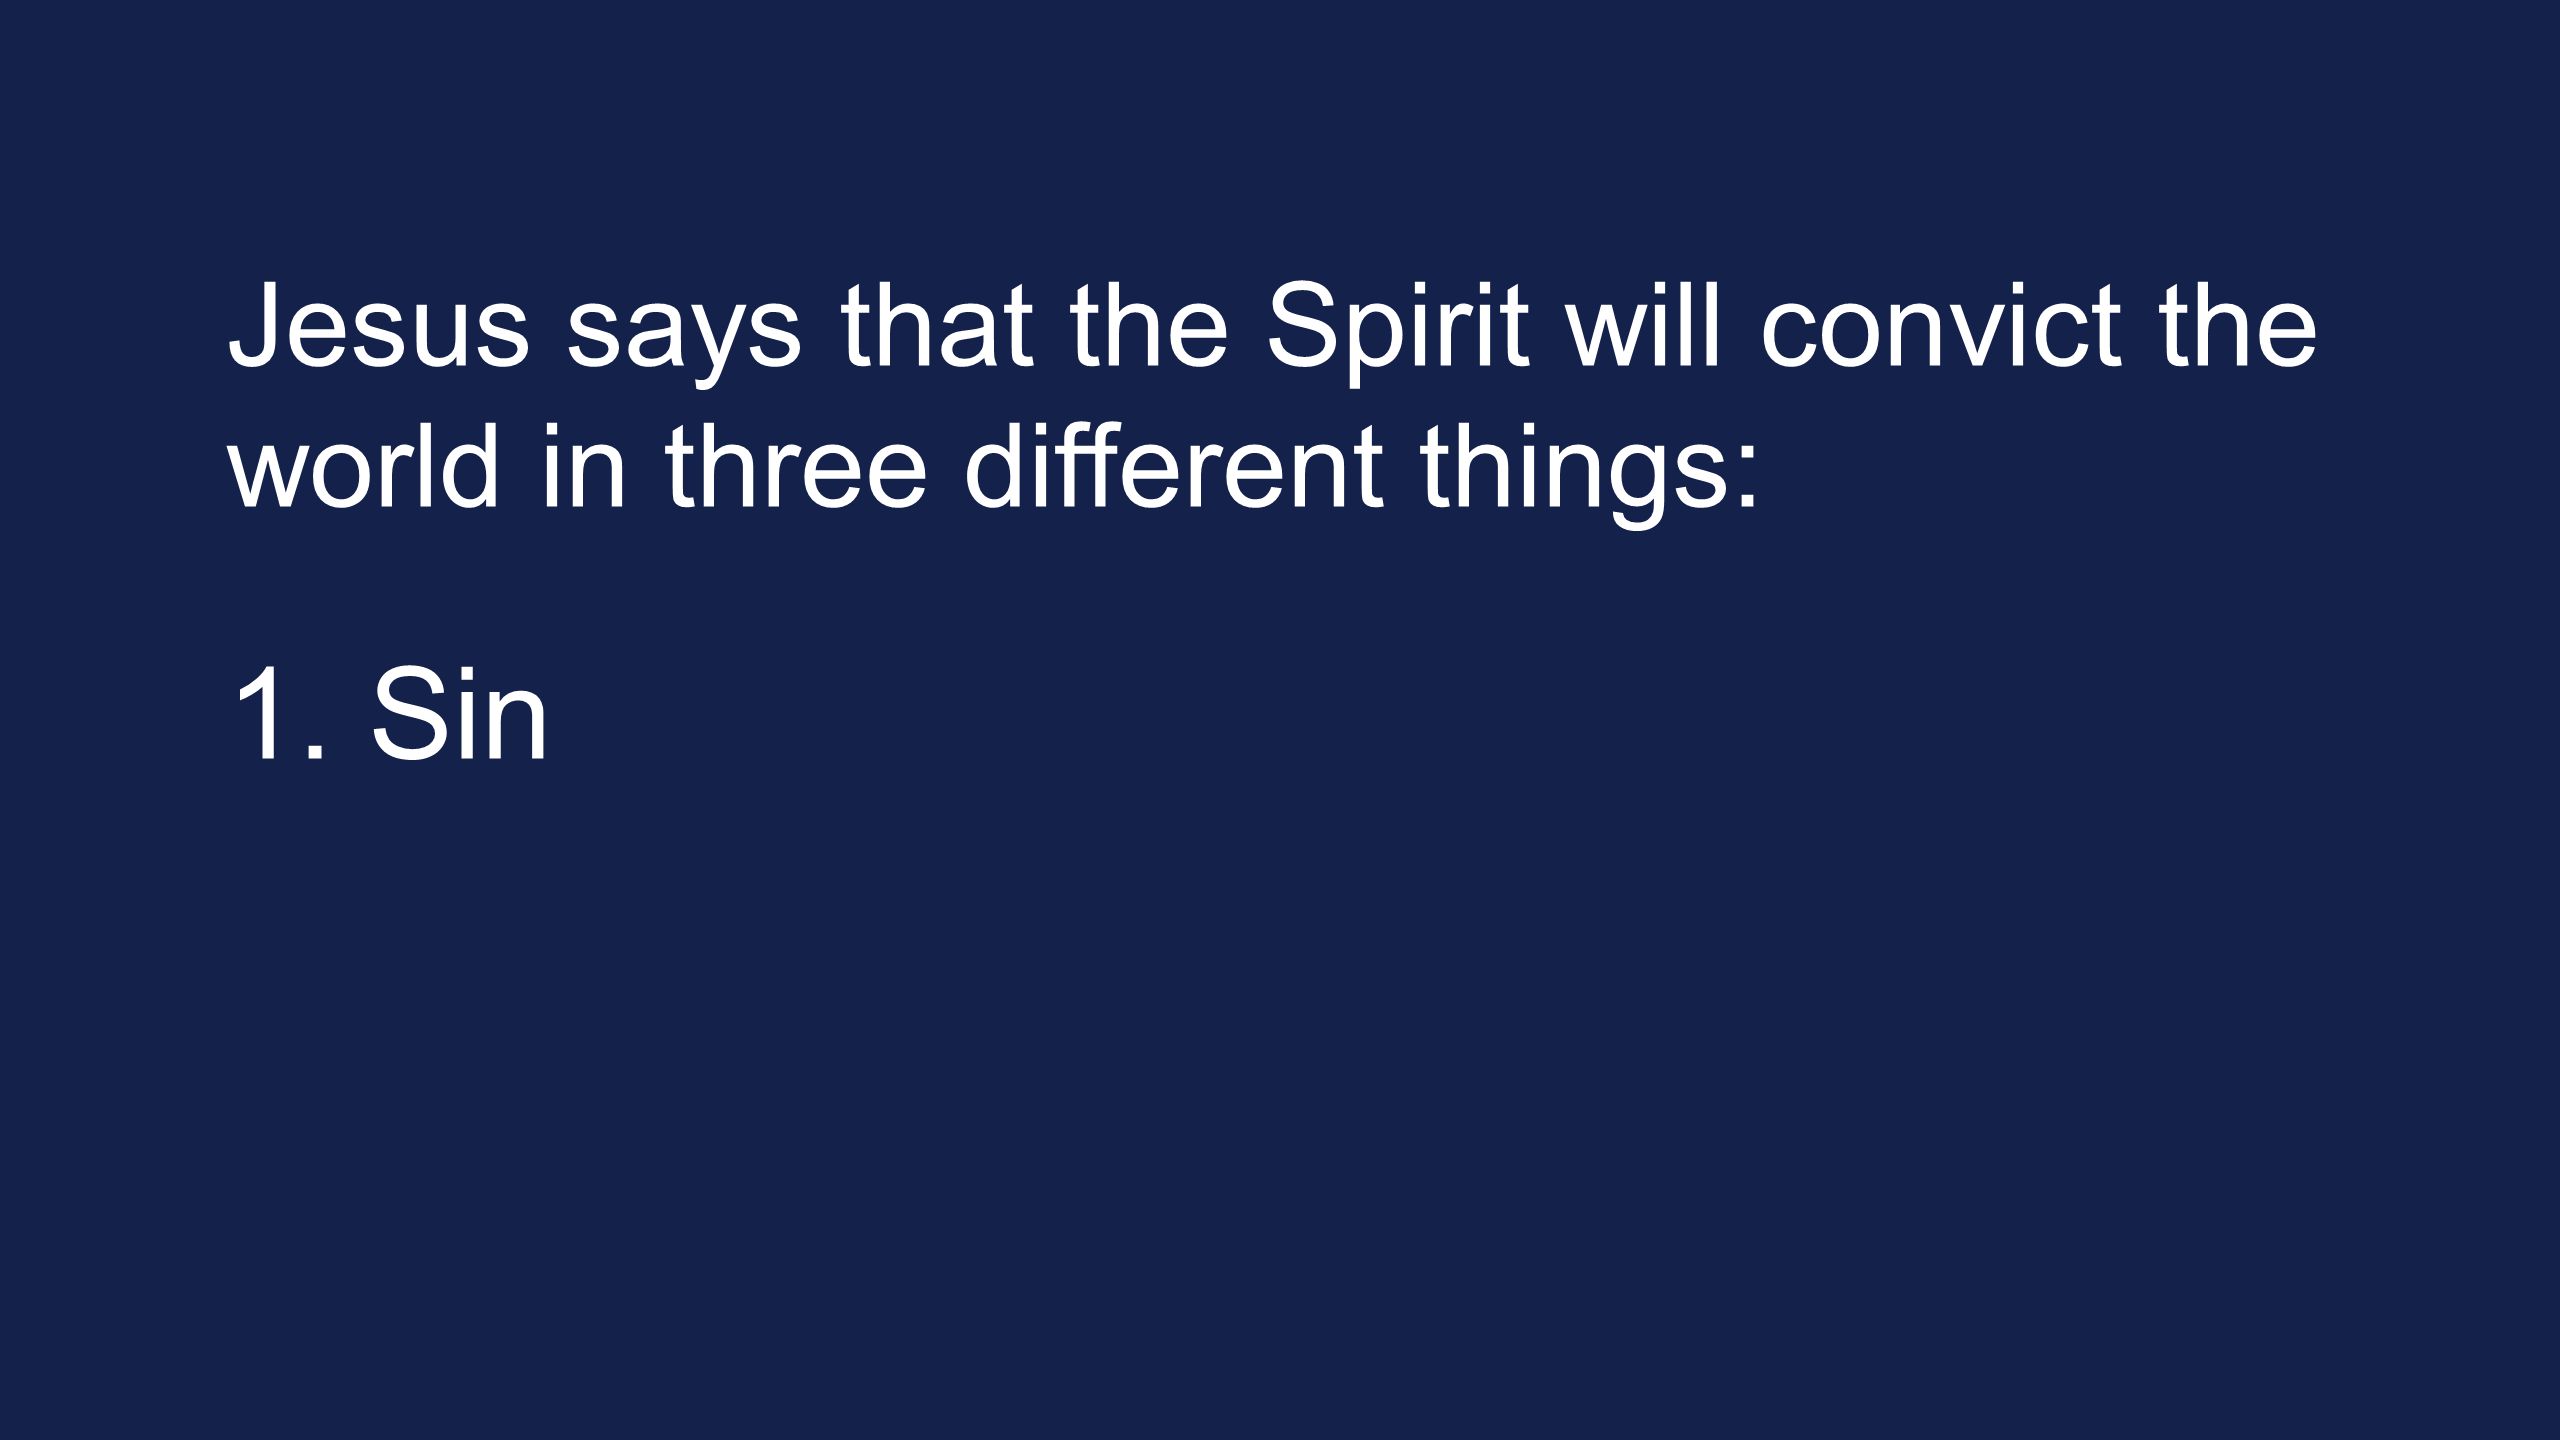 Jesus says that the Spirit will convict the world in three different things: 1. Sin